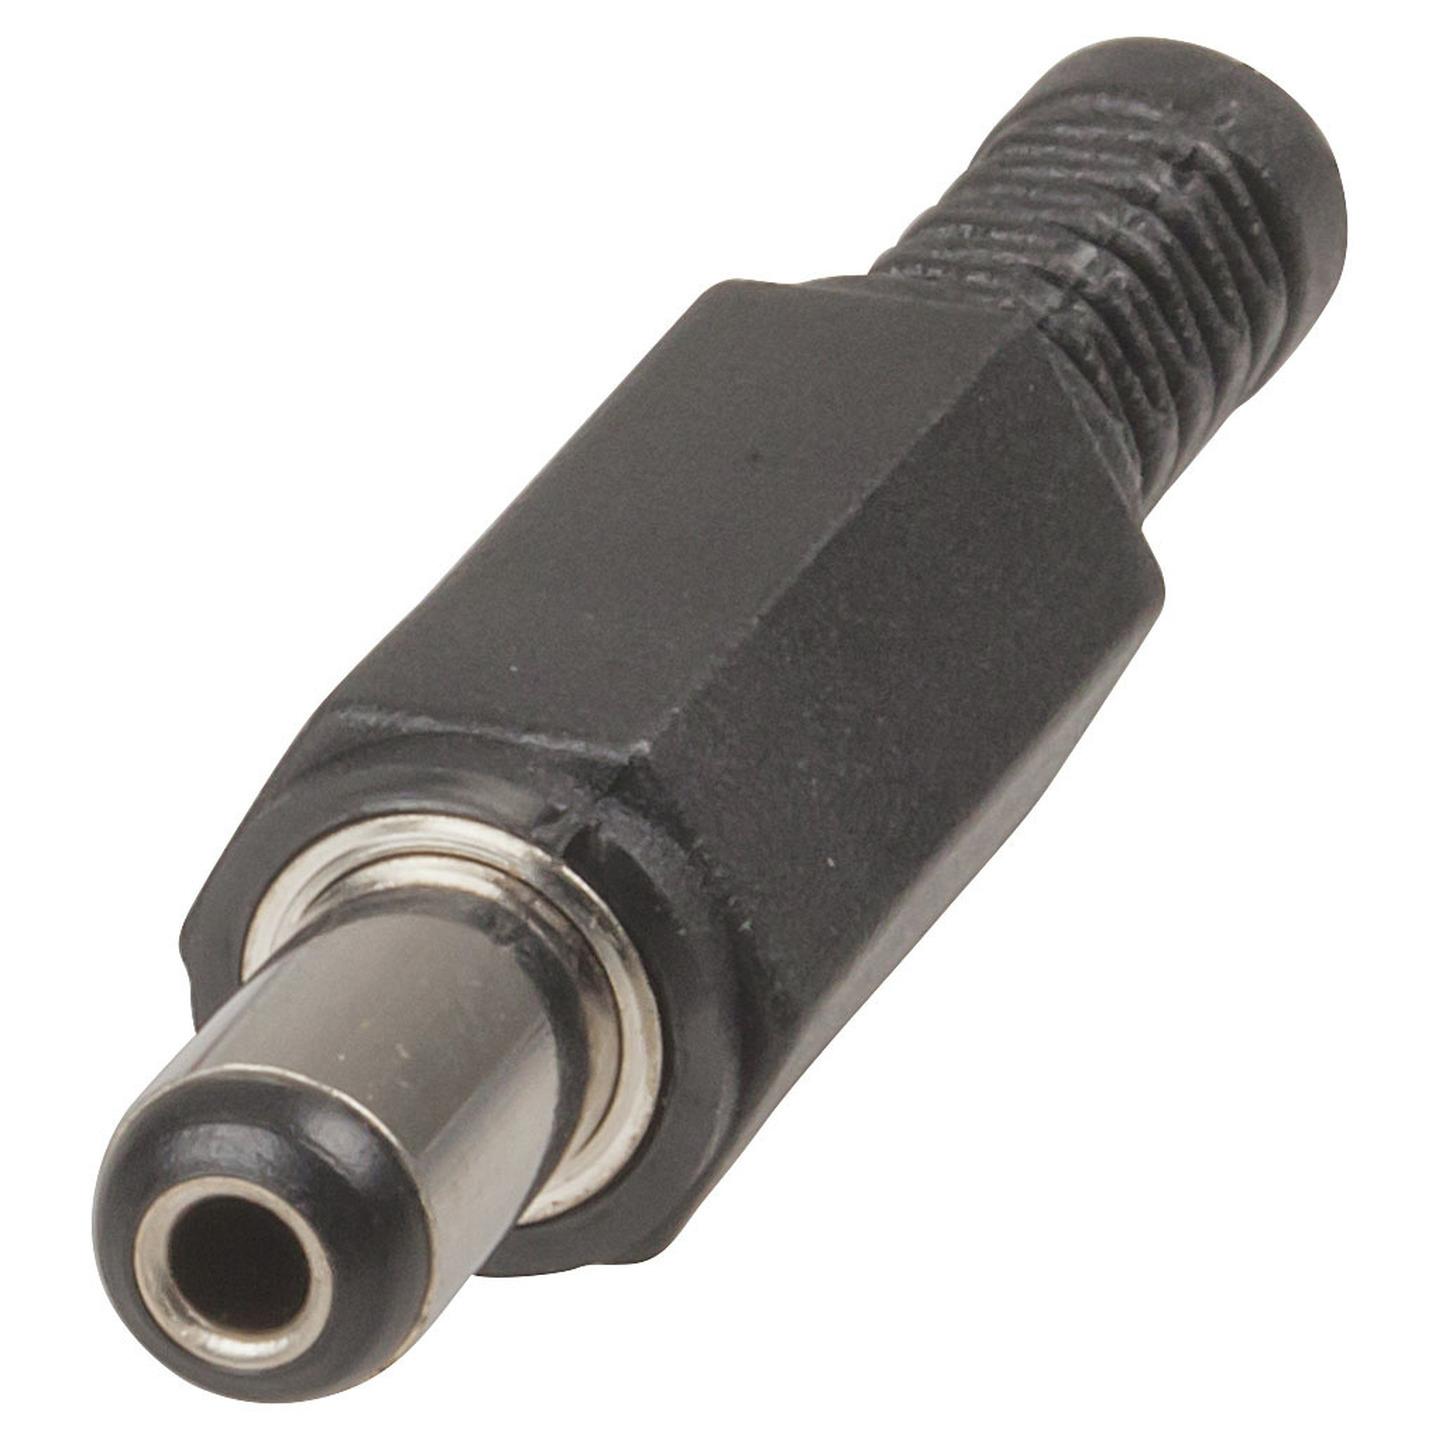 2.1mm DC Power Line Connector